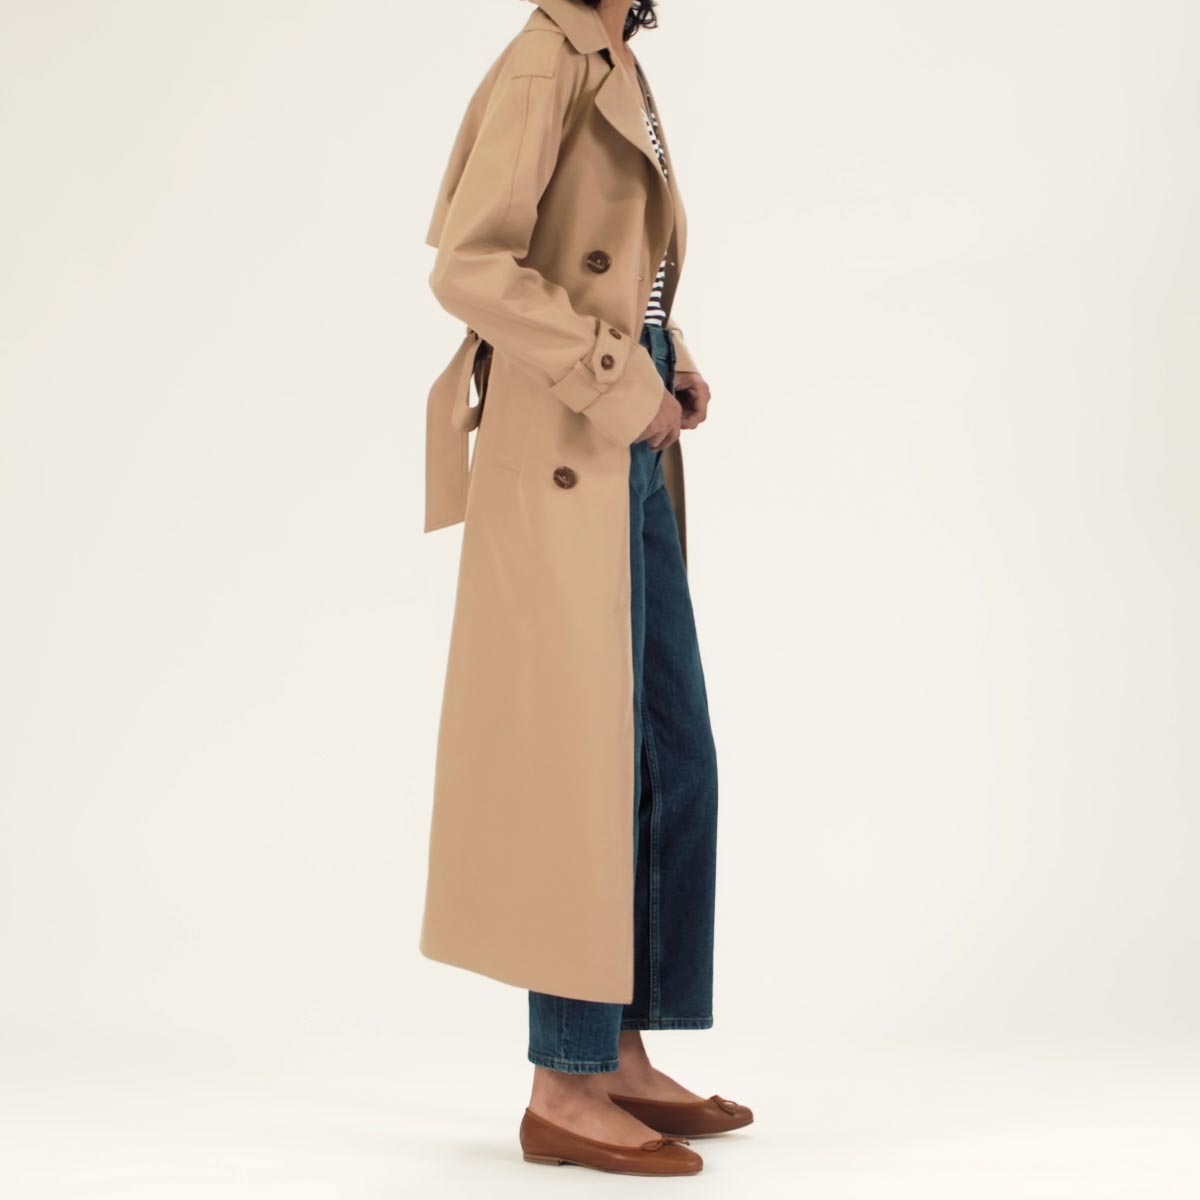 The Demi in Saddle Nappa shown on model styled with straight leg denim, a striped shirt and a tan calf-length trench coat.